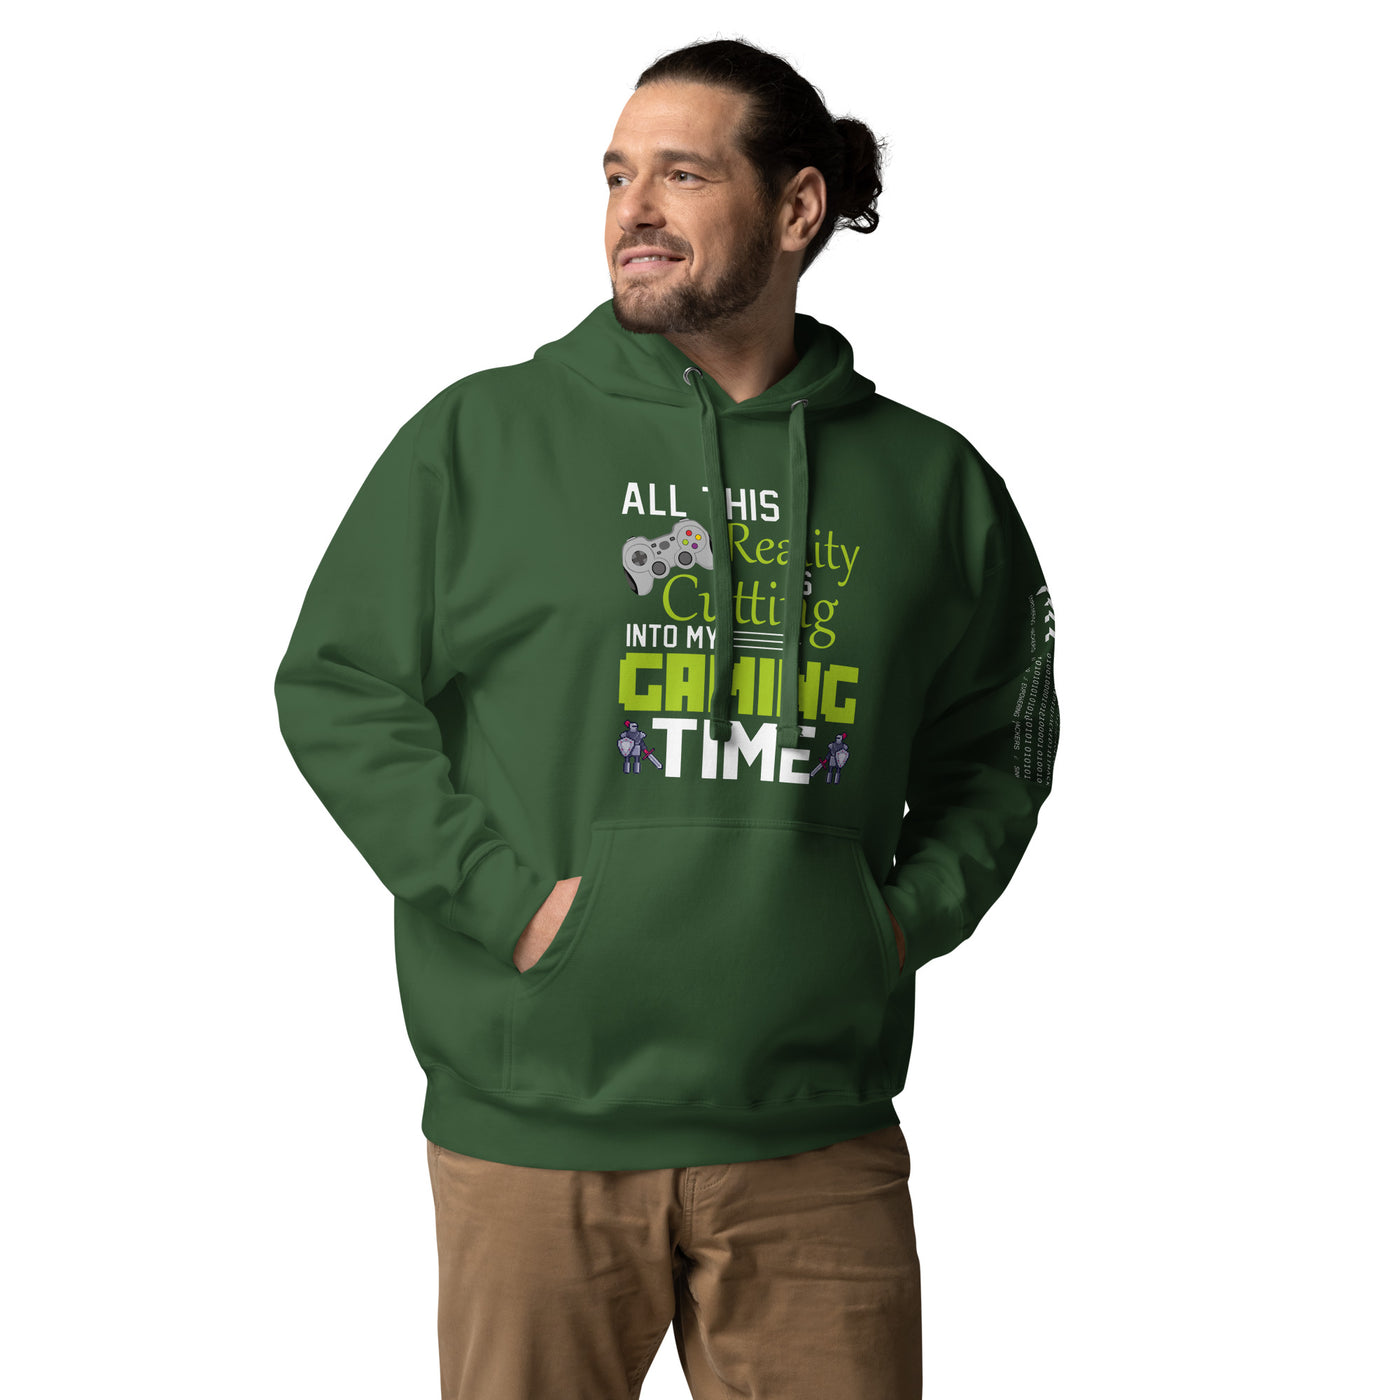 All this reality is cutting my Gaming Time - Unisex Hoodie